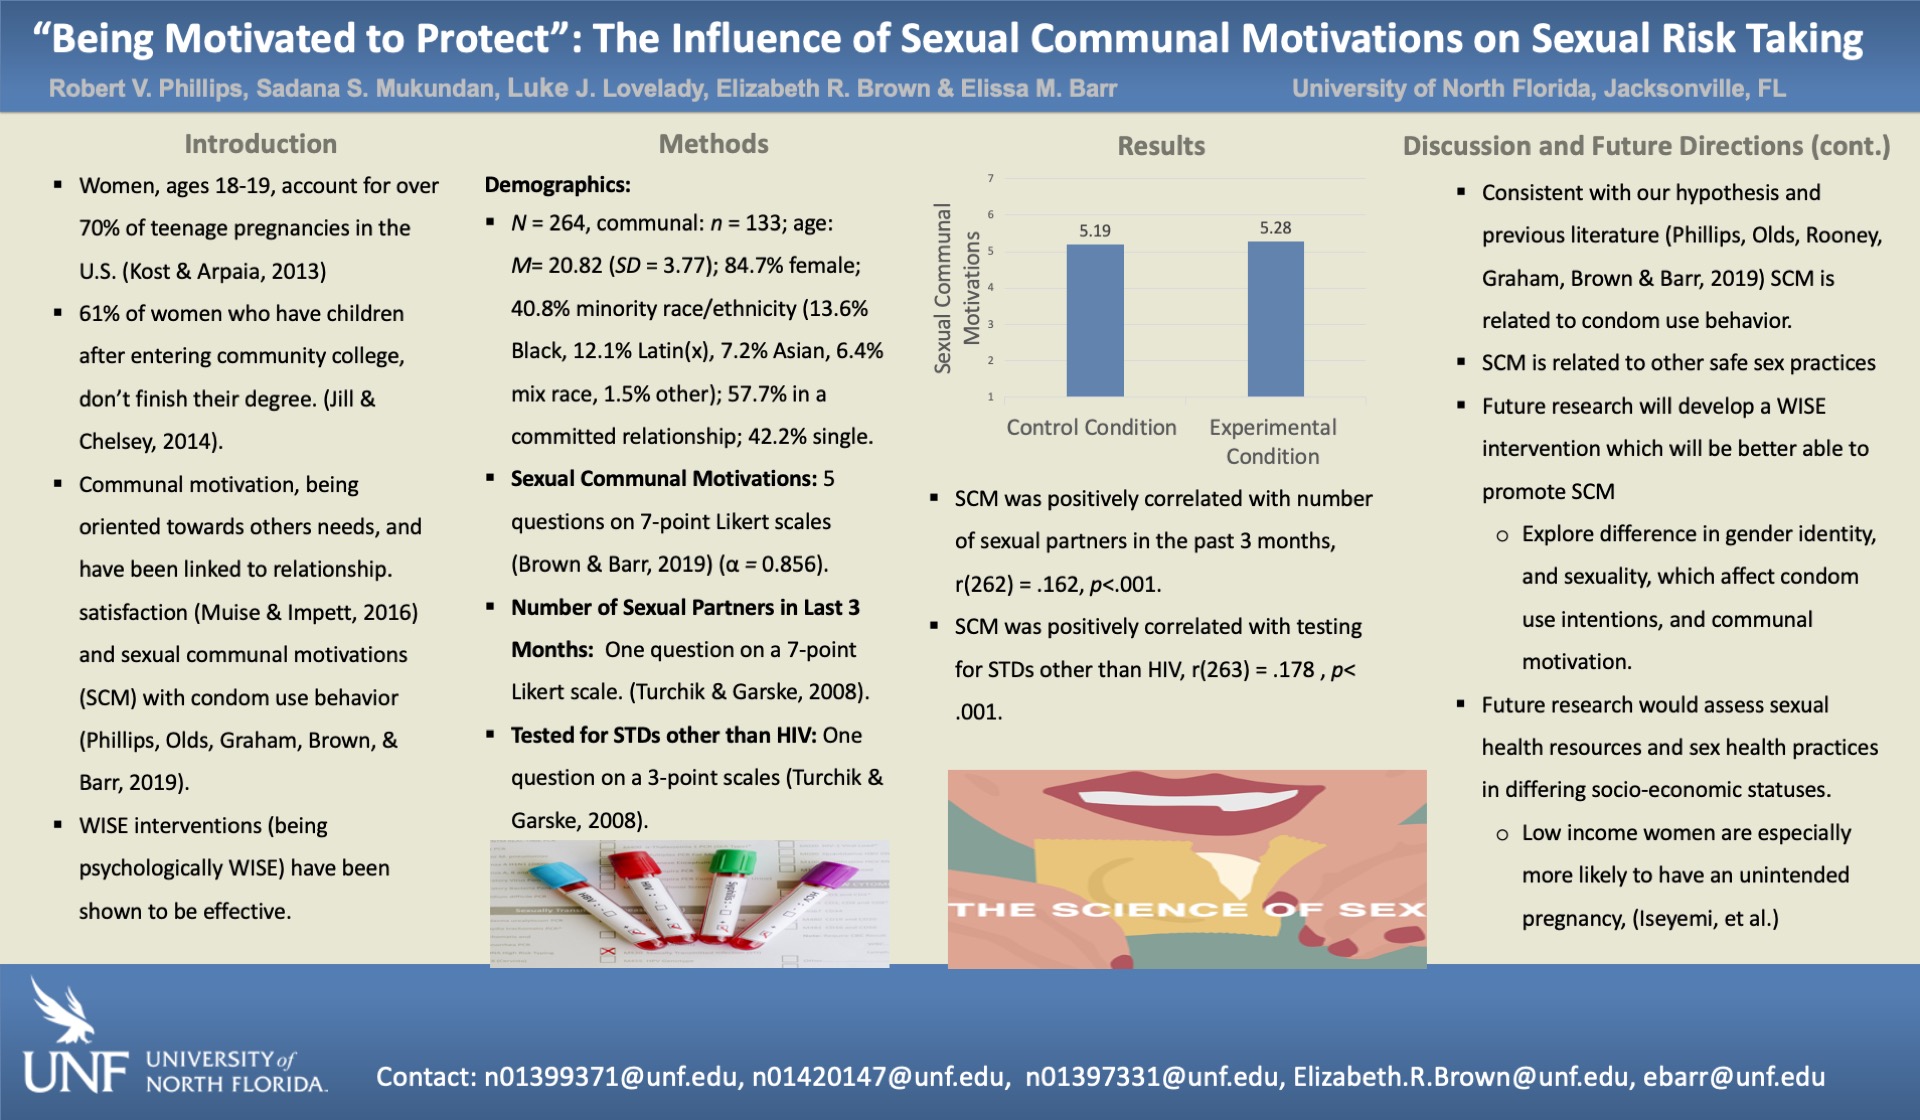 Being Motivated to Protect” The Influence of Sexual Communal Motivations on Sexual Risk Taking